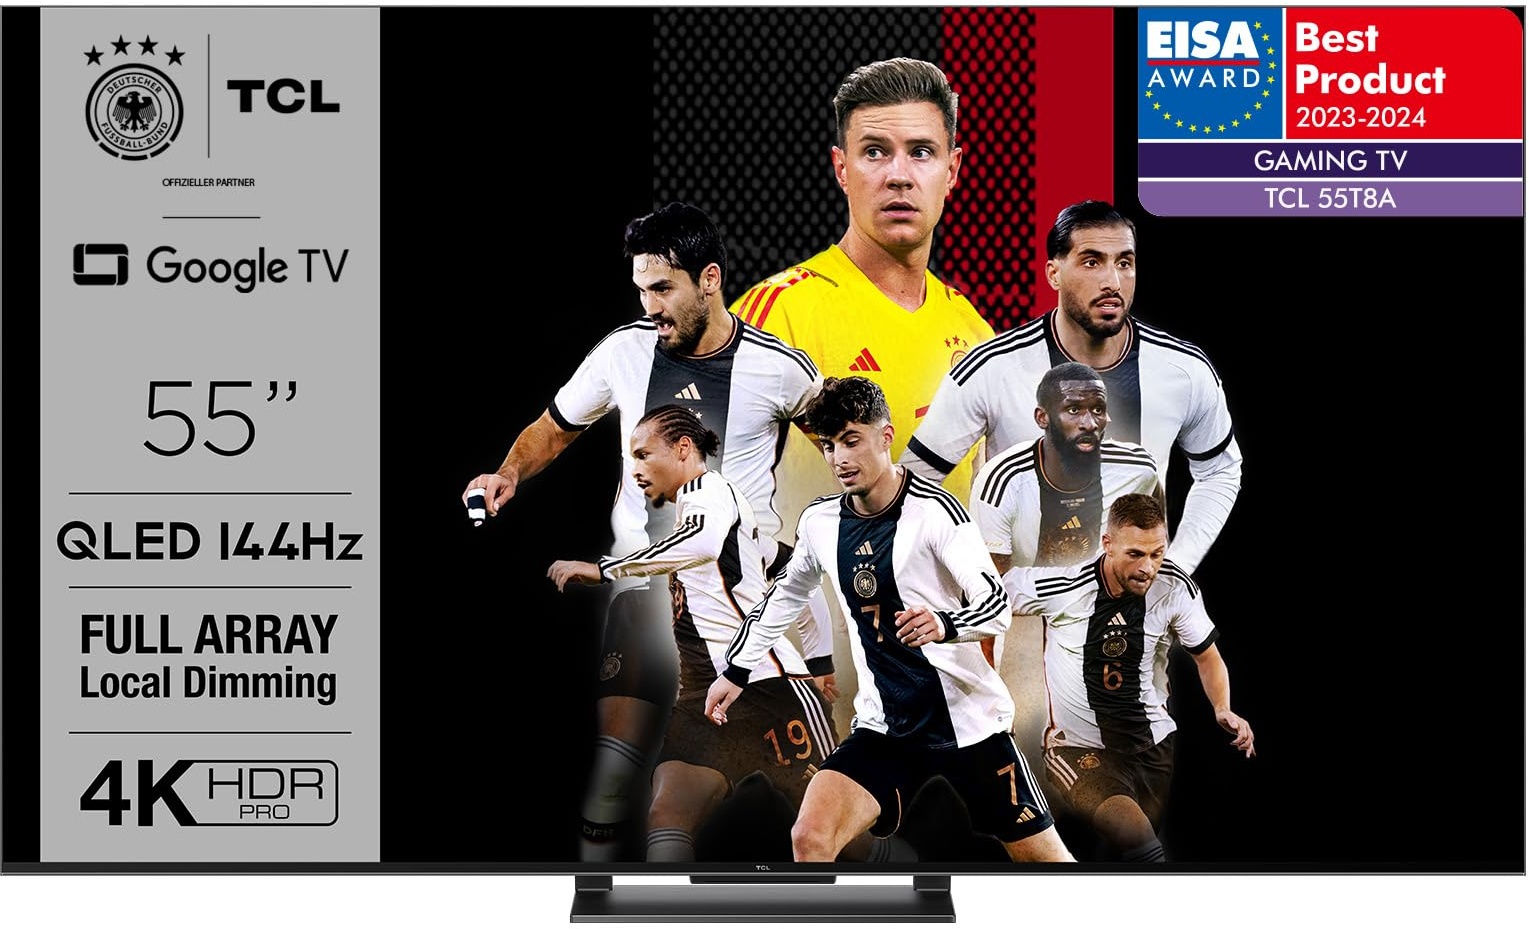 TCL 55T8A 55-Zoll-Fernseher, QLED, HDR 1000 nits, Full Array Local Dimming, IMAX Enhanced, 144Hz VRR, Dolby Vision und Atmos TV, Unterstützt bei Google